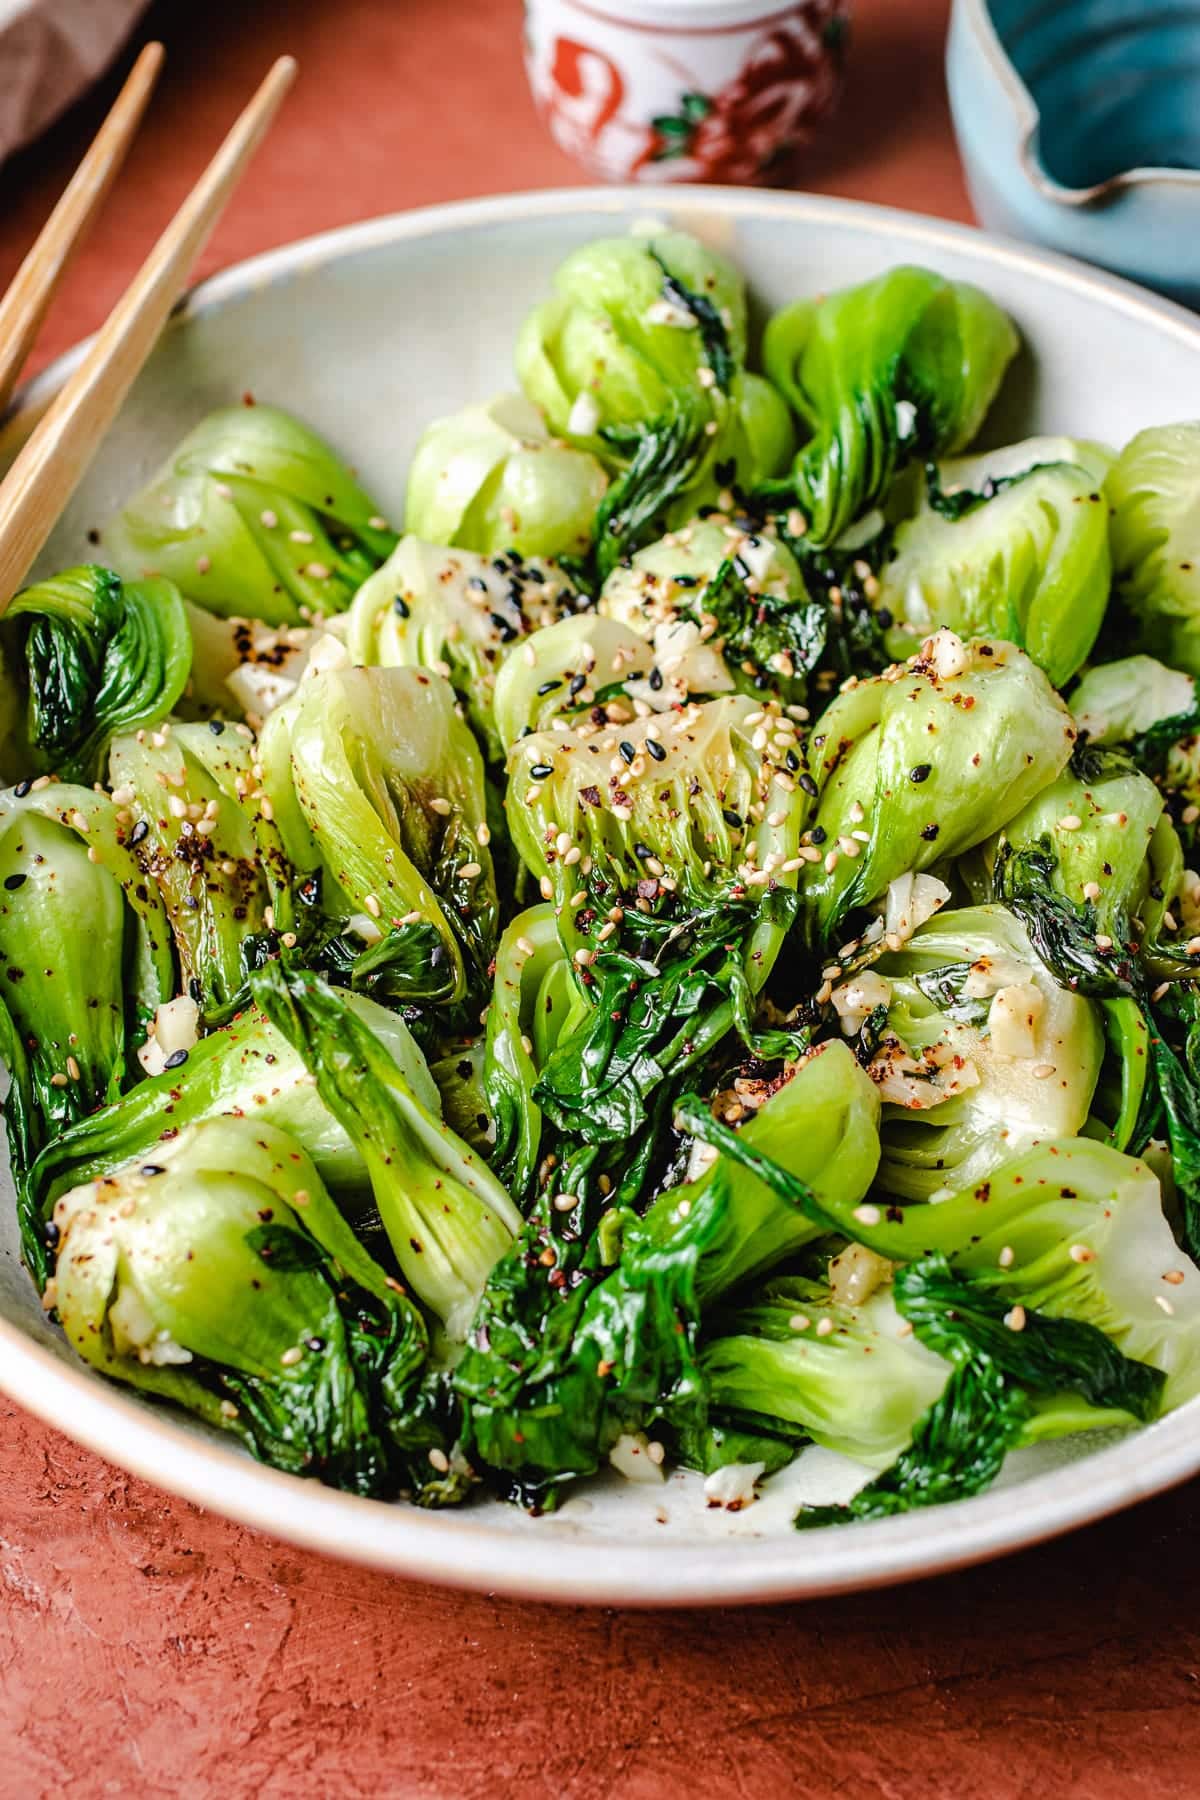 Chineses stir fried baby bok choy served in a white plate with chopsticks